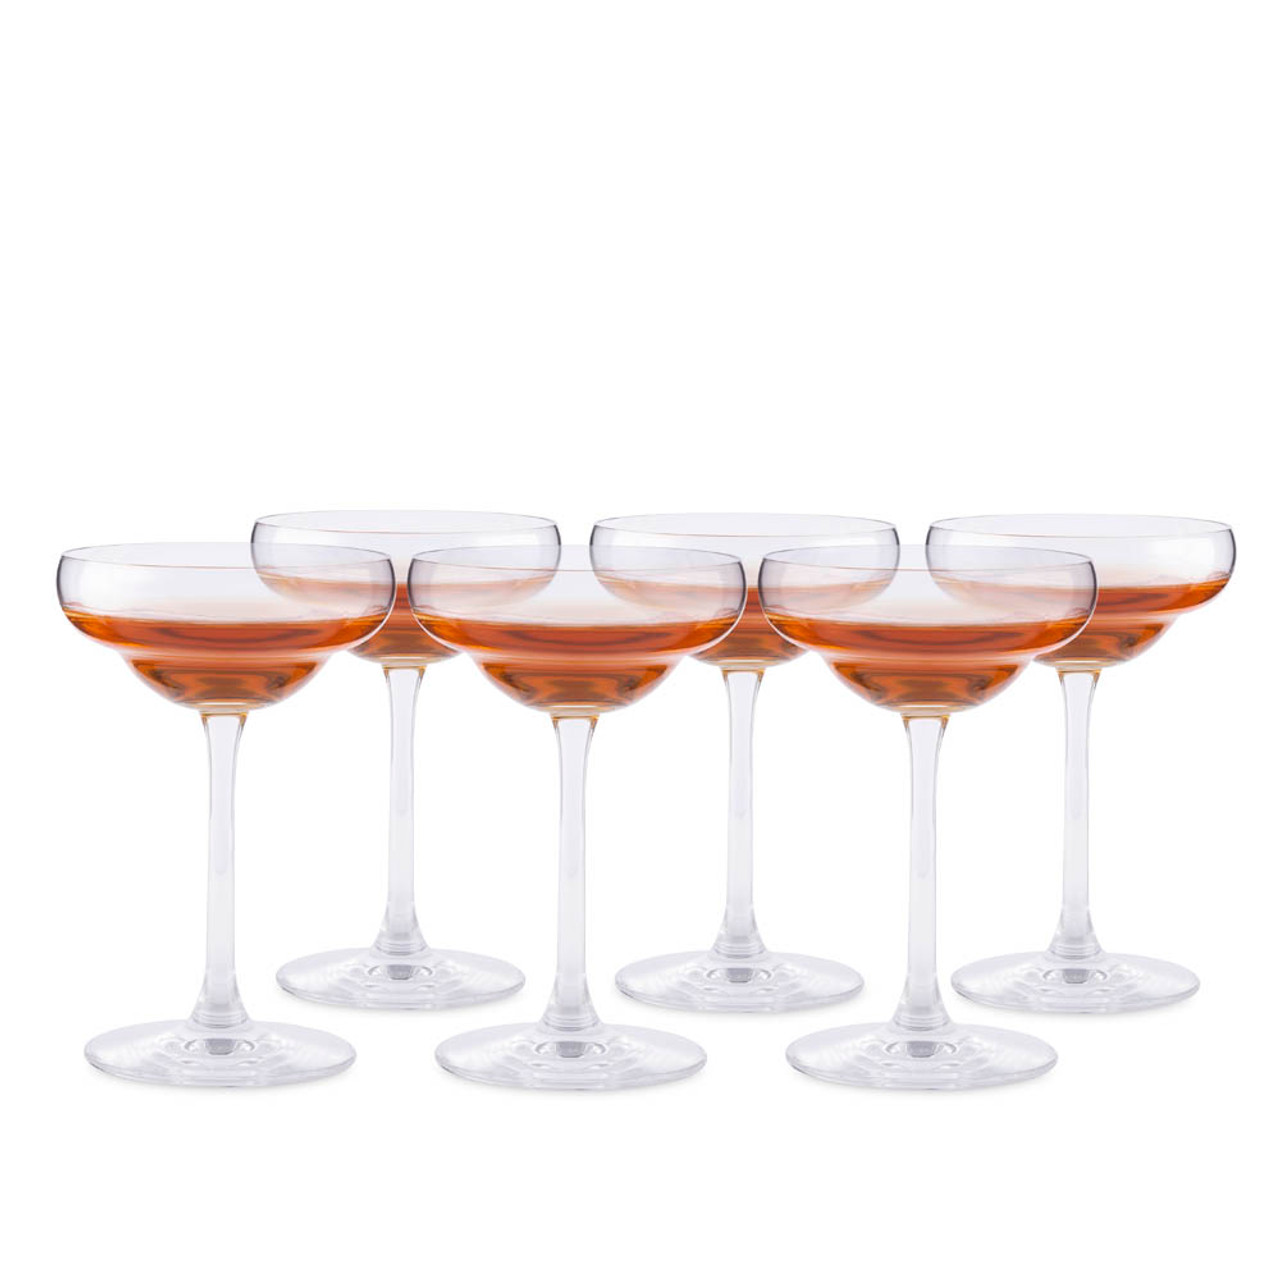 https://cdn11.bigcommerce.com/s-cznxq08r7/images/stencil/1280x1280/products/870/9335/ub2978-urban_bar_coley_crystal_coupe_glasses_-_5.8_oz_-_set_of_6-1_1__71408.1590772603.jpg?c=1